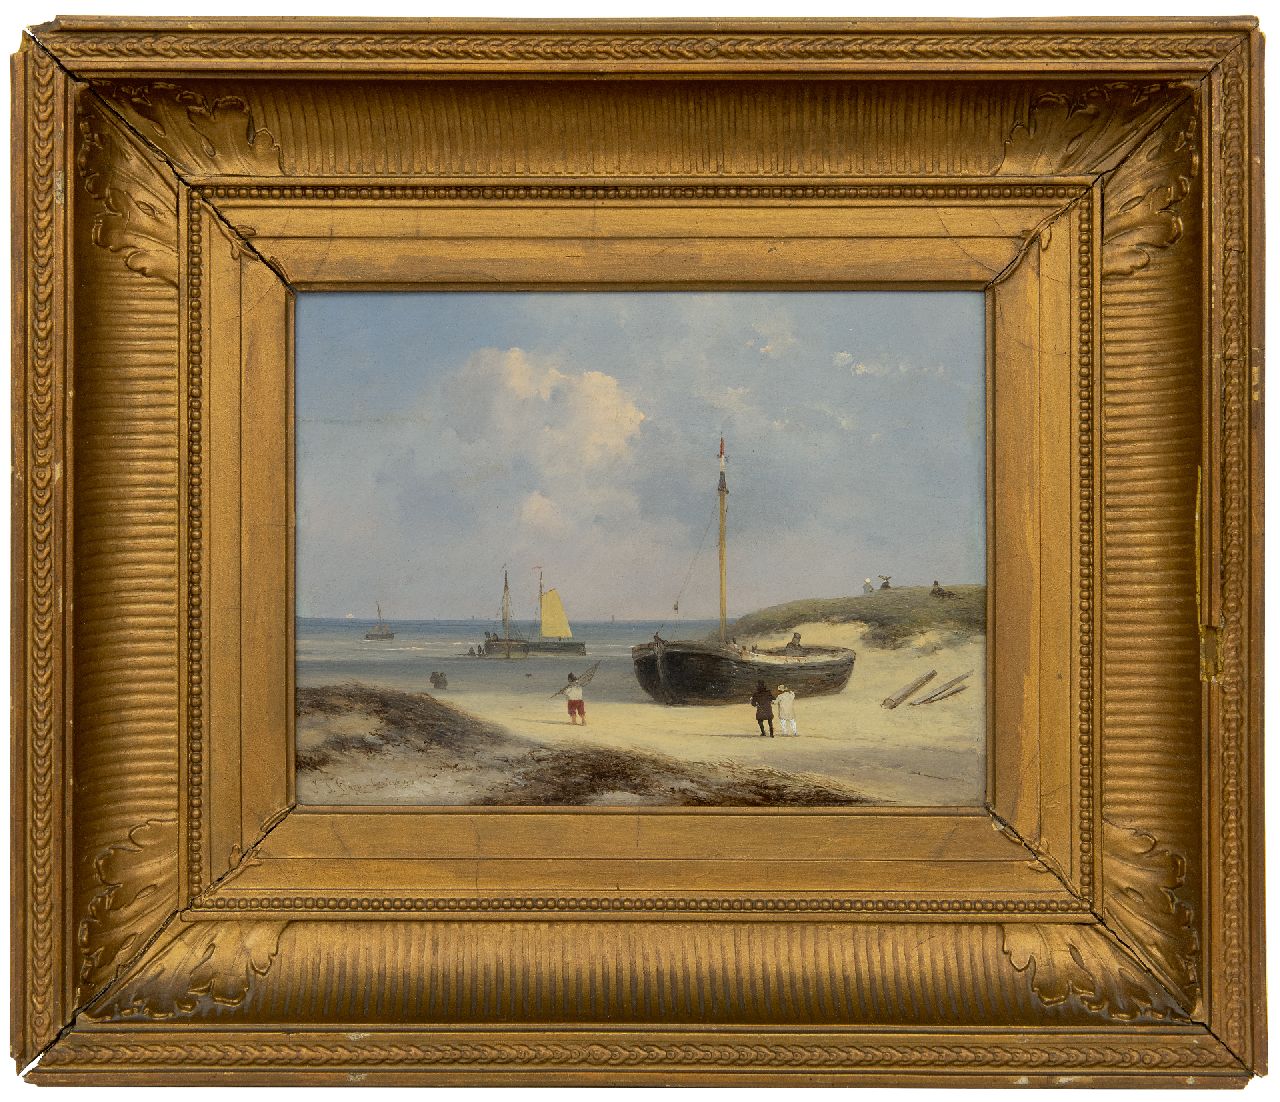 Hoppenbrouwers J.F.  | Johannes Franciscus Hoppenbrouwers | Paintings offered for sale | Elegant figures, fishermen and fishing boats on the beach at Scheveningen, oil on panel 22.4 x 29.0 cm, signed l.l.